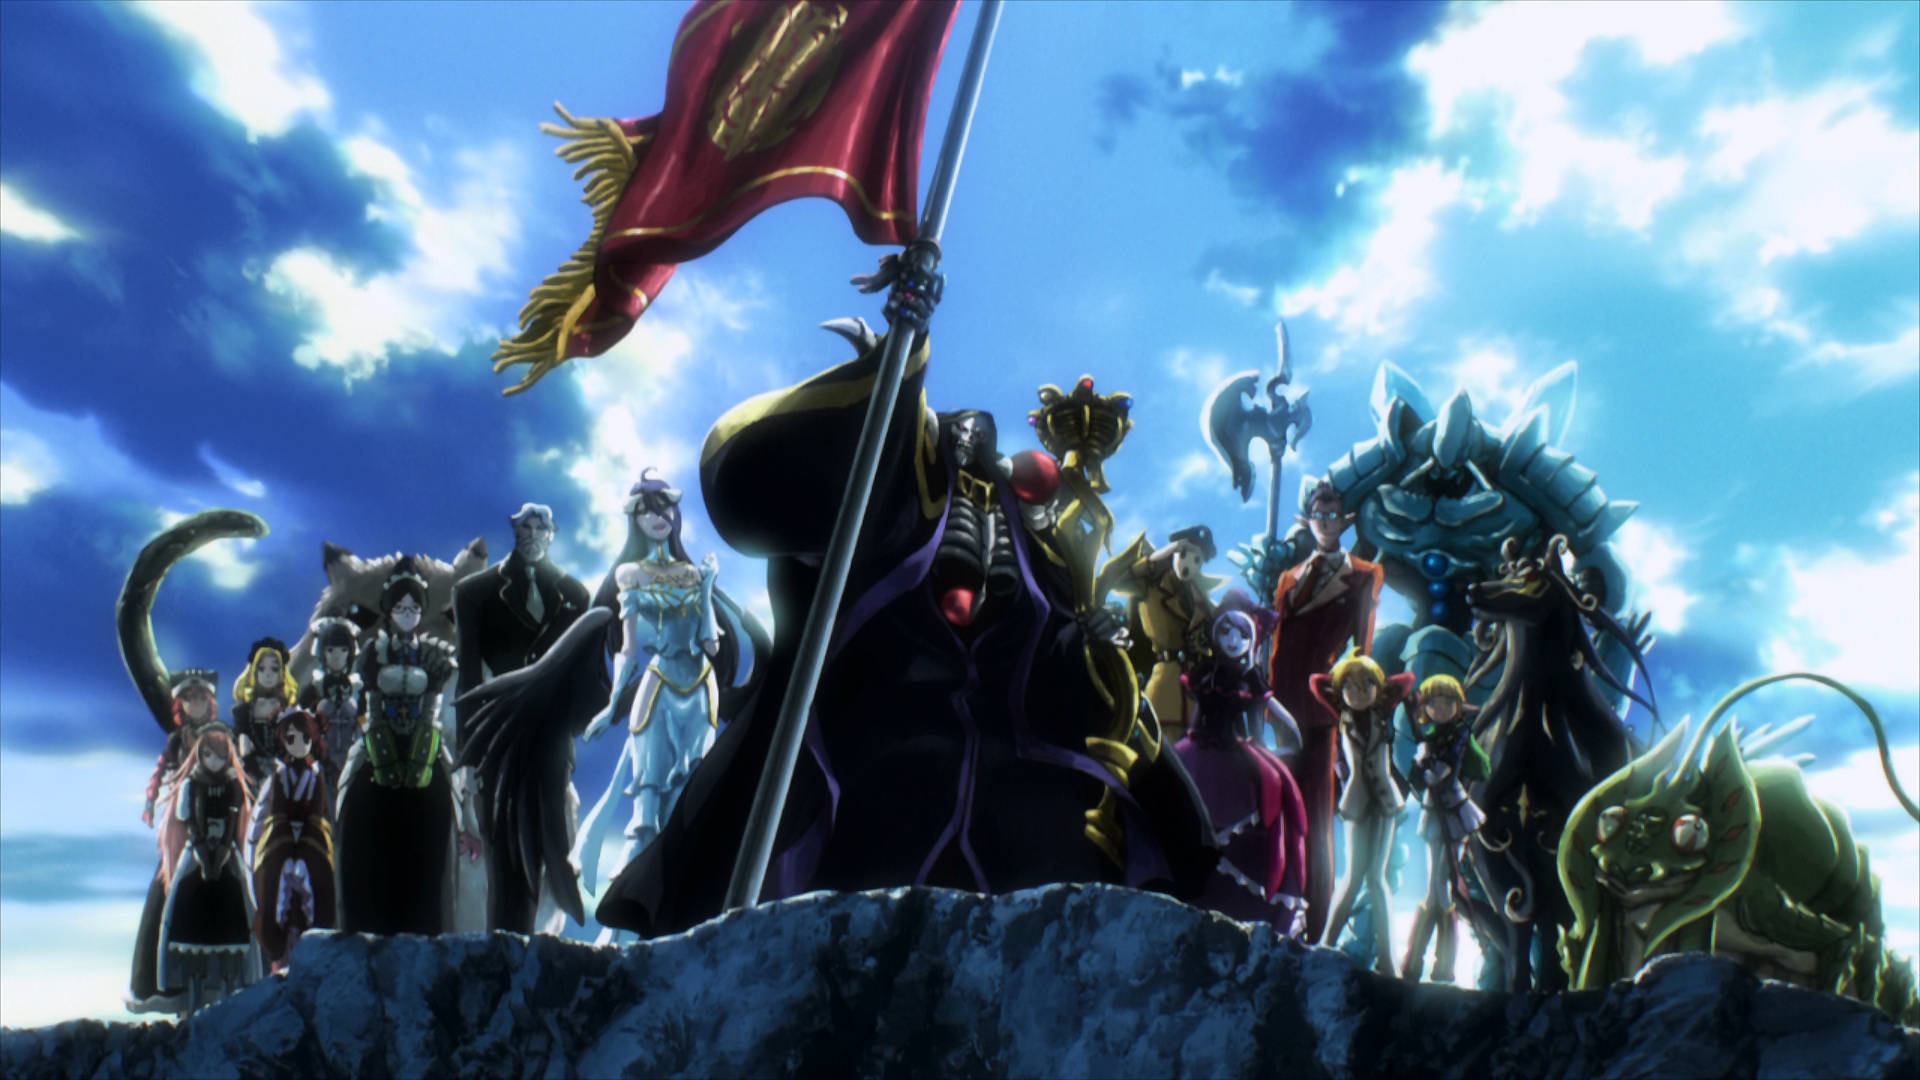 Ainz Ooal Gown and his crew, the Overlord Wallpaper